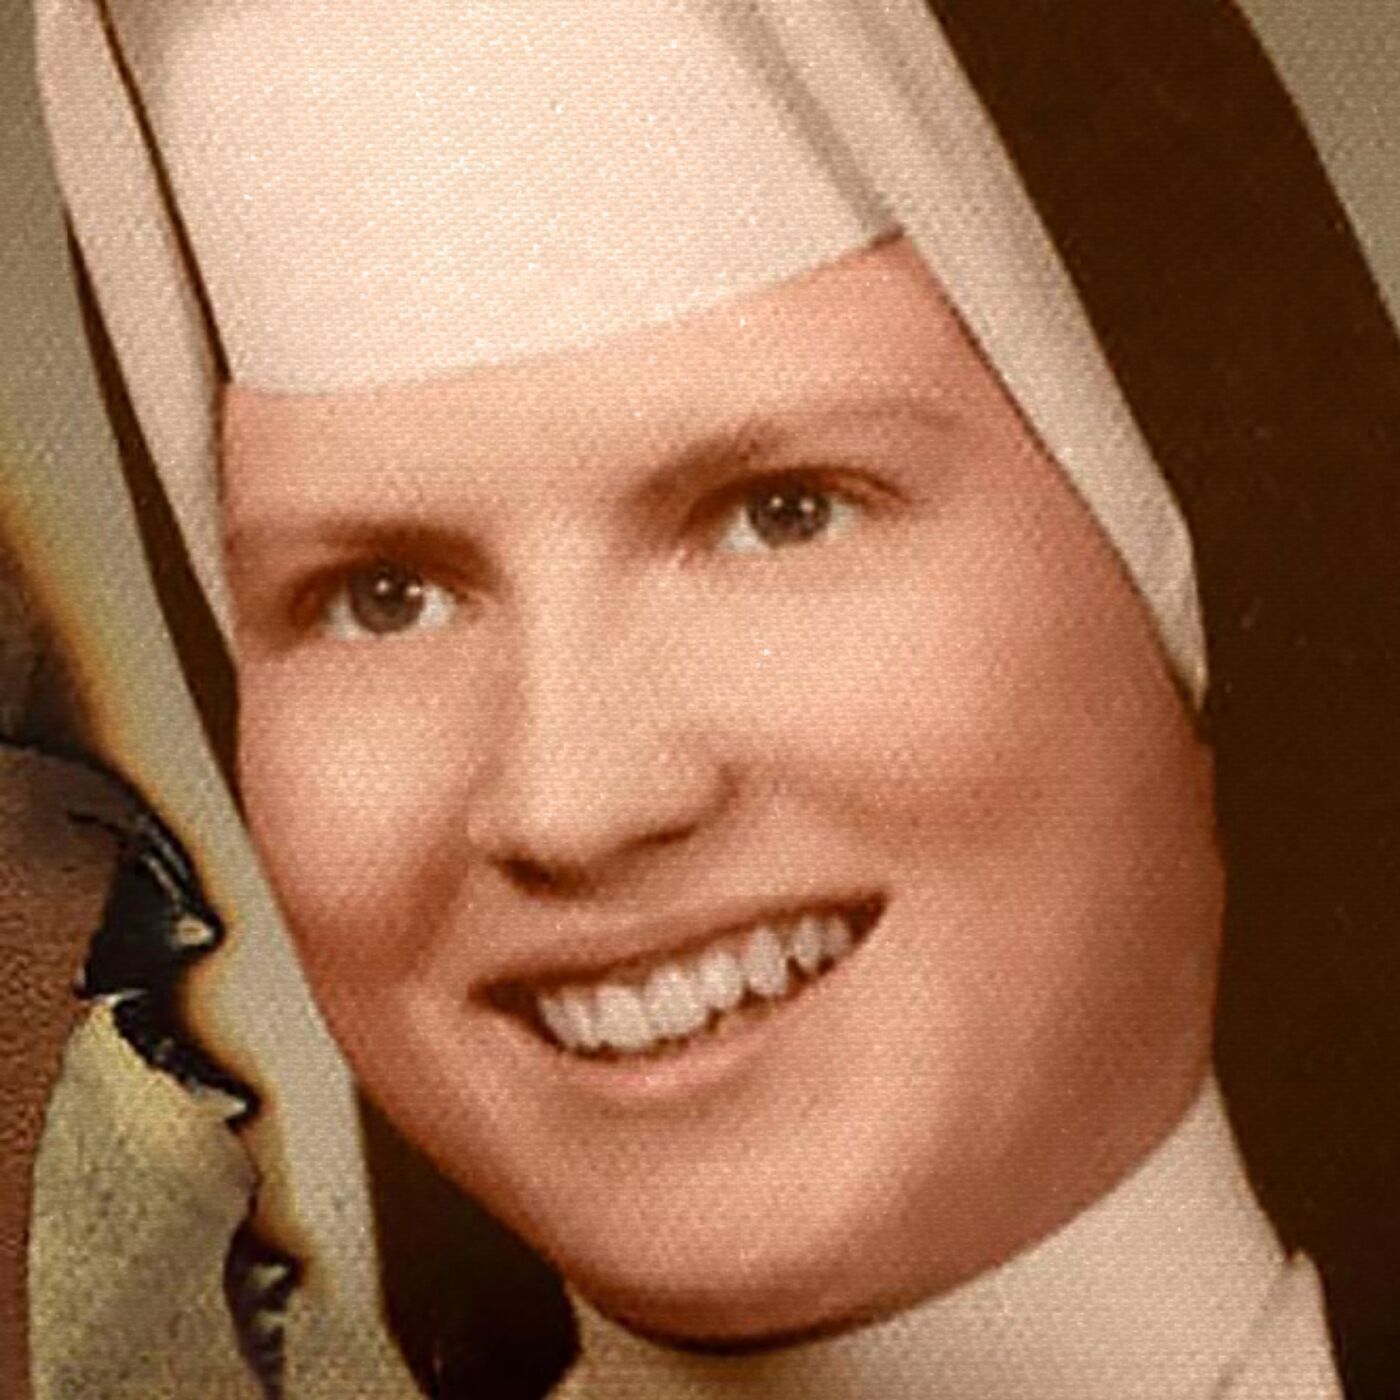 S2 Ep19: Sister Cathy, Bombshell: Man in the Trench Coat, Part 2